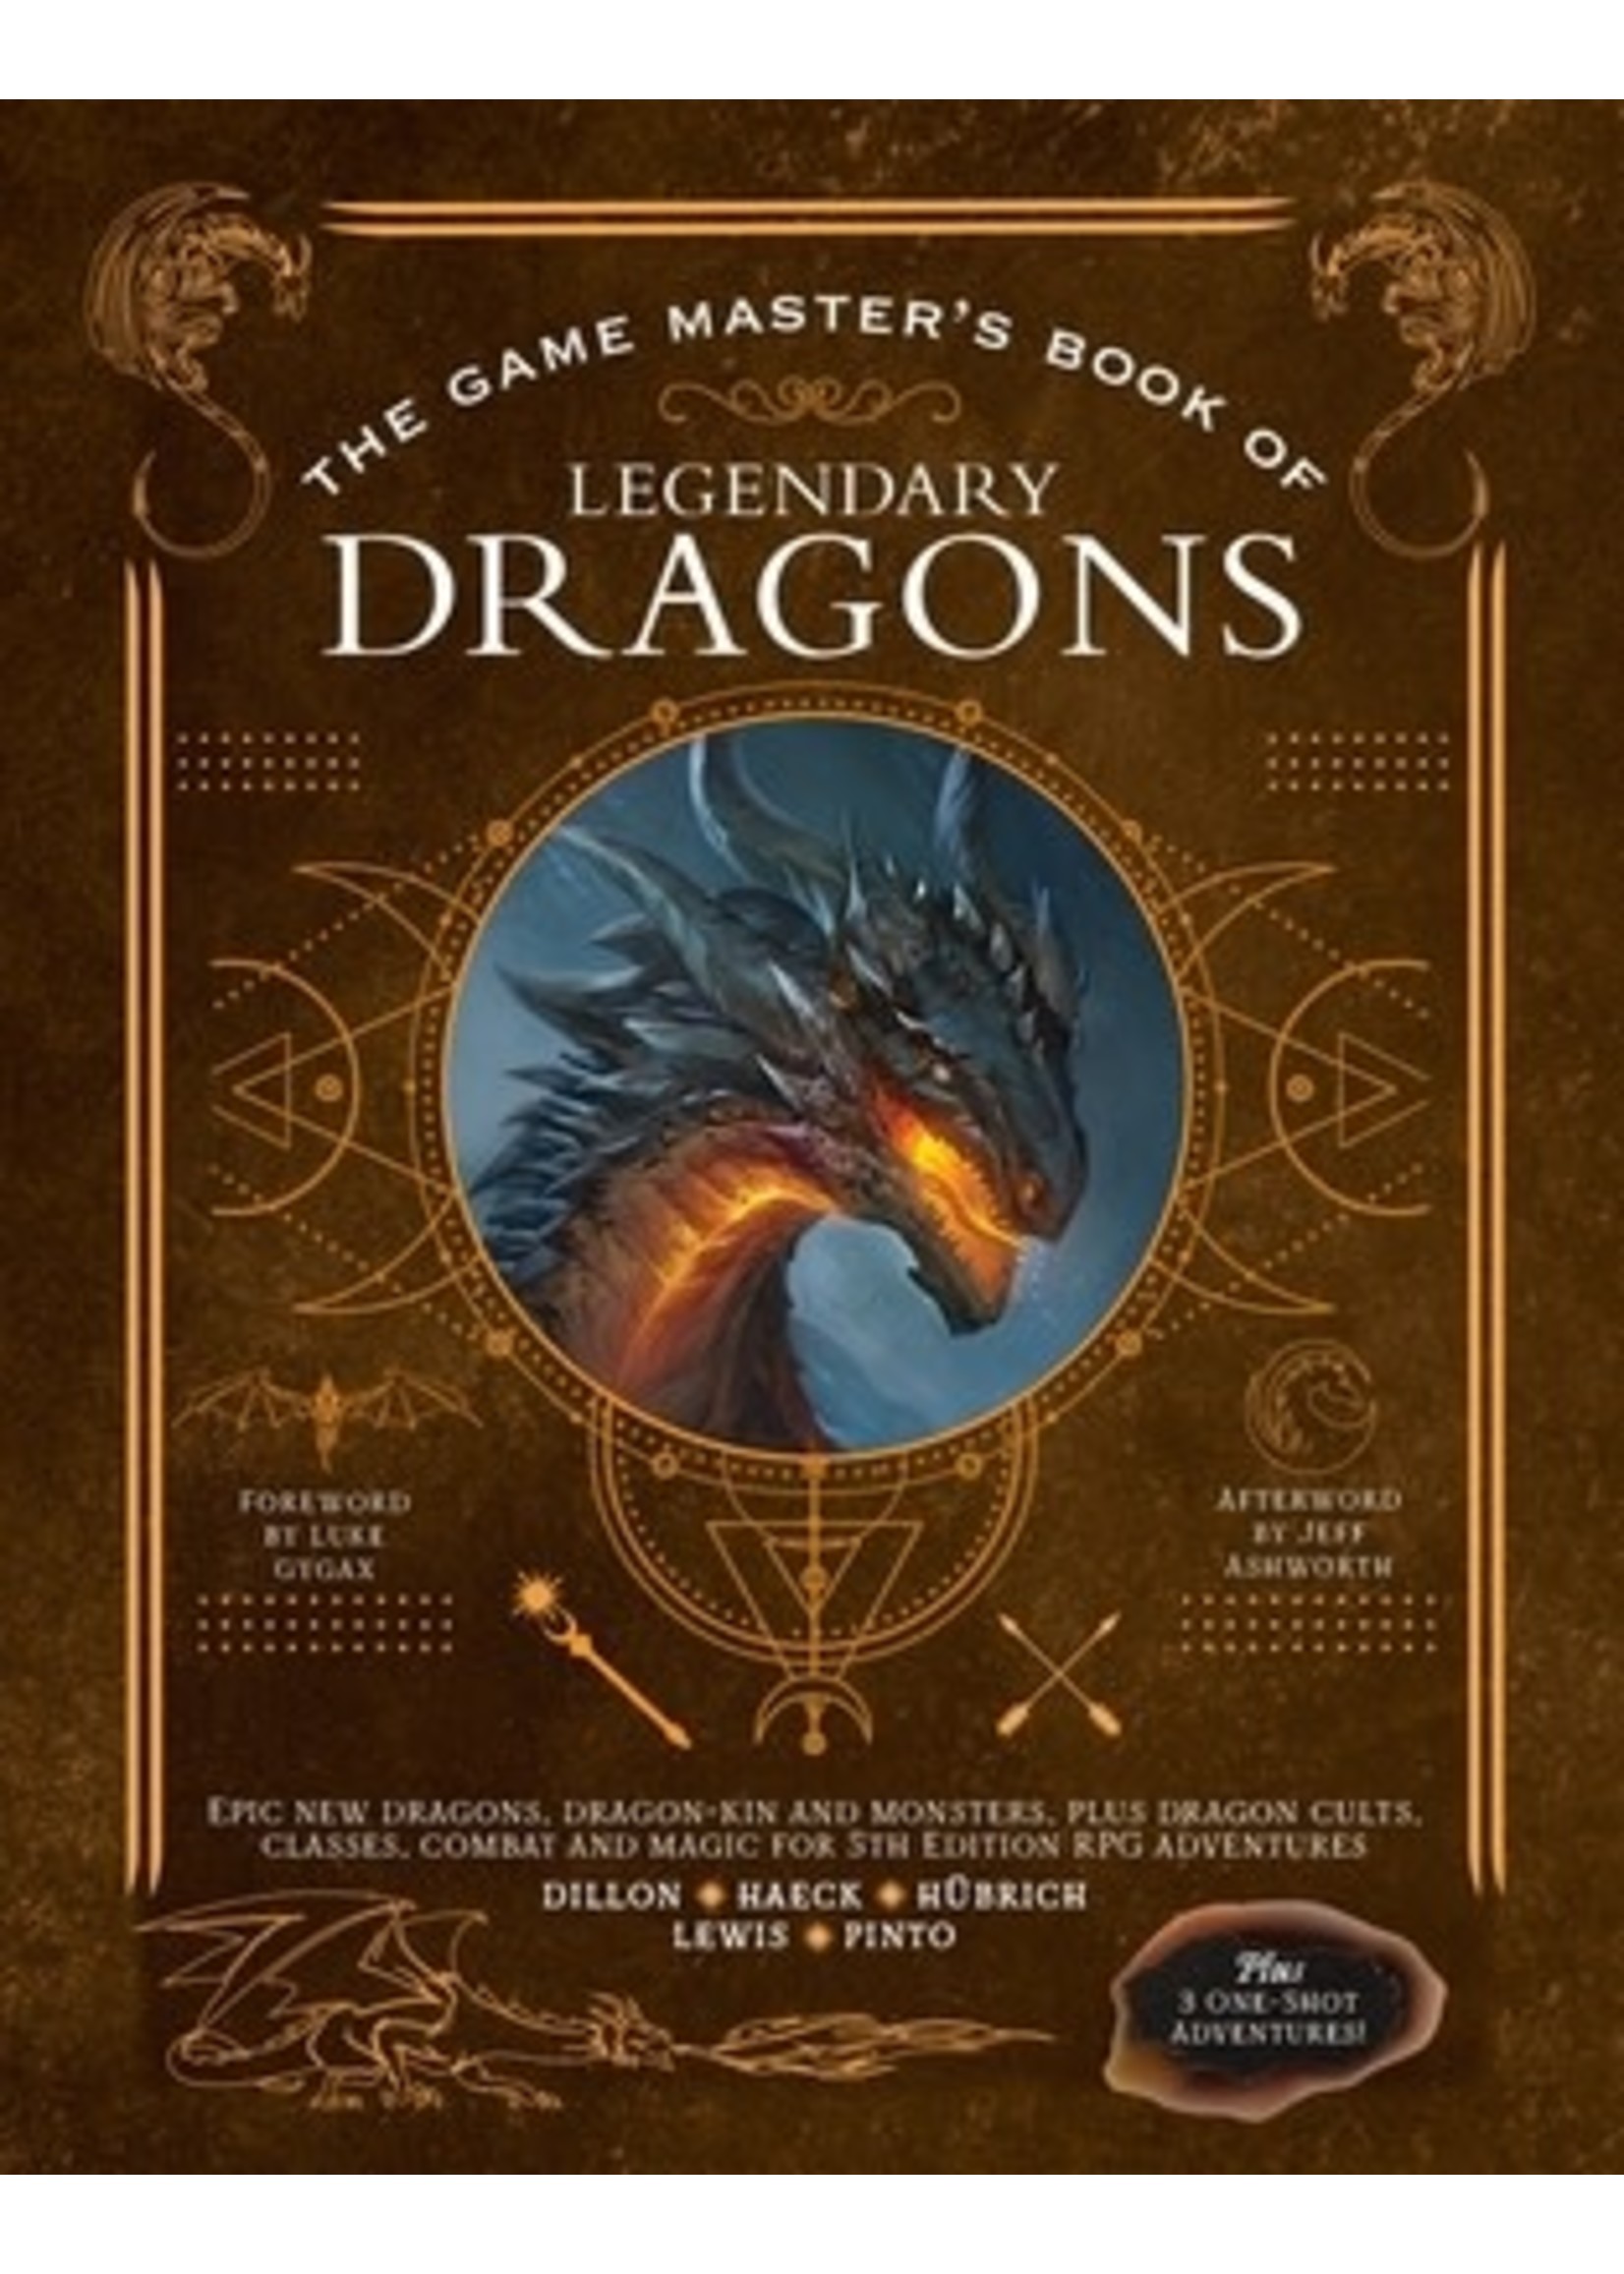 The Game Master's Book of Legendary Dragons: Epic new dragons, dragon-kin and monsters, plus dragon cults, classes, combat and magic for 5th Edition RPG adventures by Aaron Hübrich, Dan Dillon, Cody C. Lewis, James J. Haeck, Jim Pinto